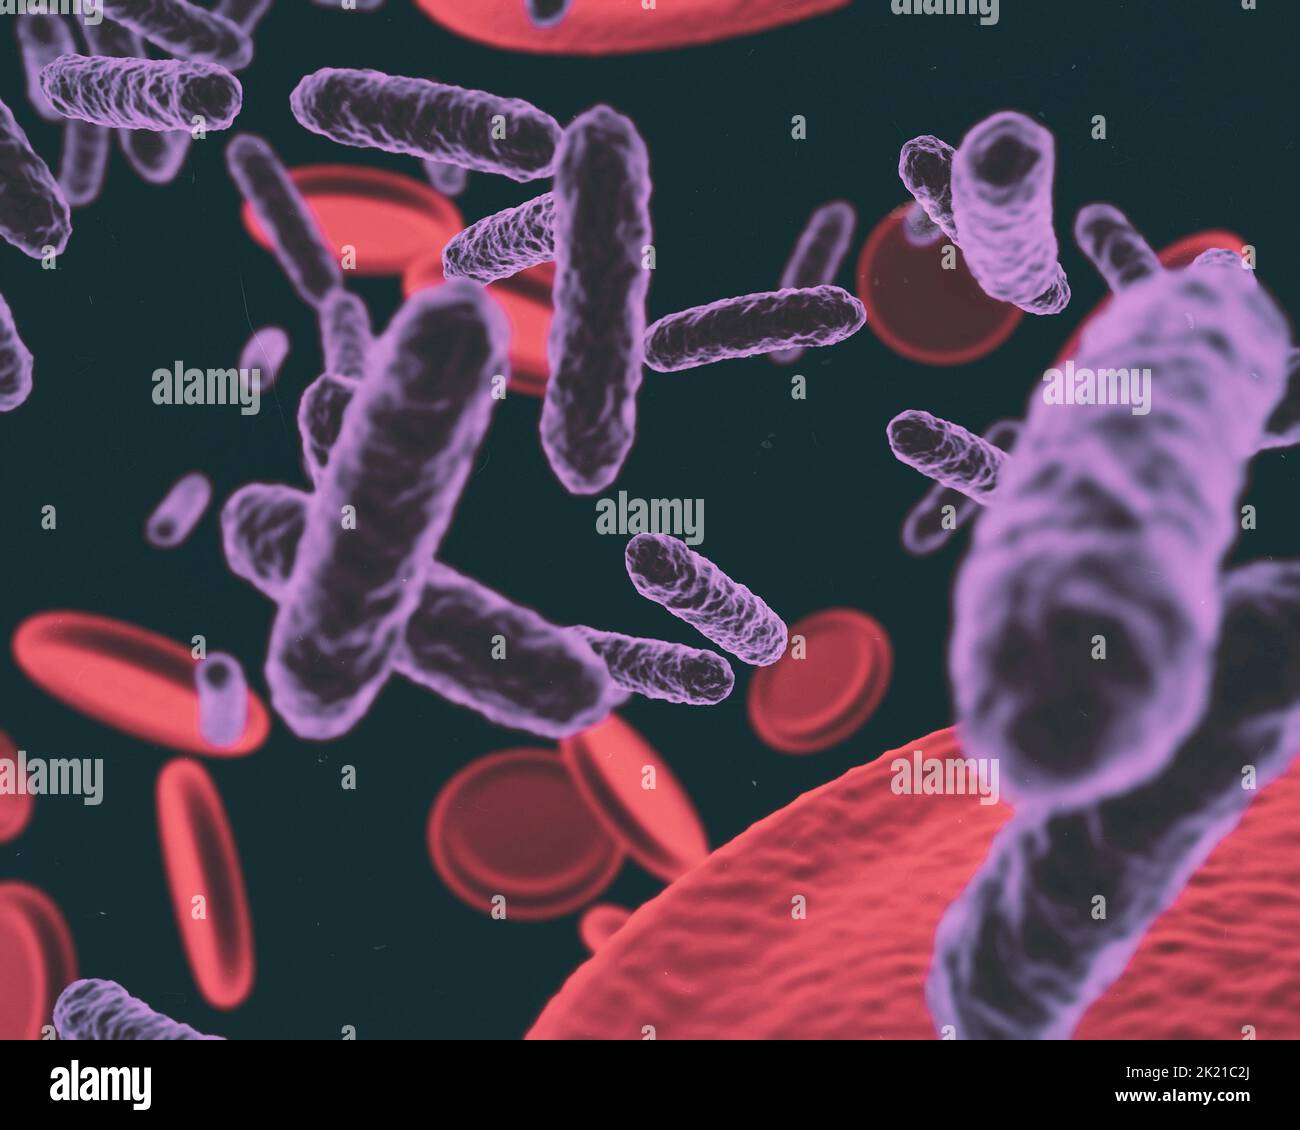 Attack of the viruses. Microscopic view of a virus attacking healthy cells. Stock Photo